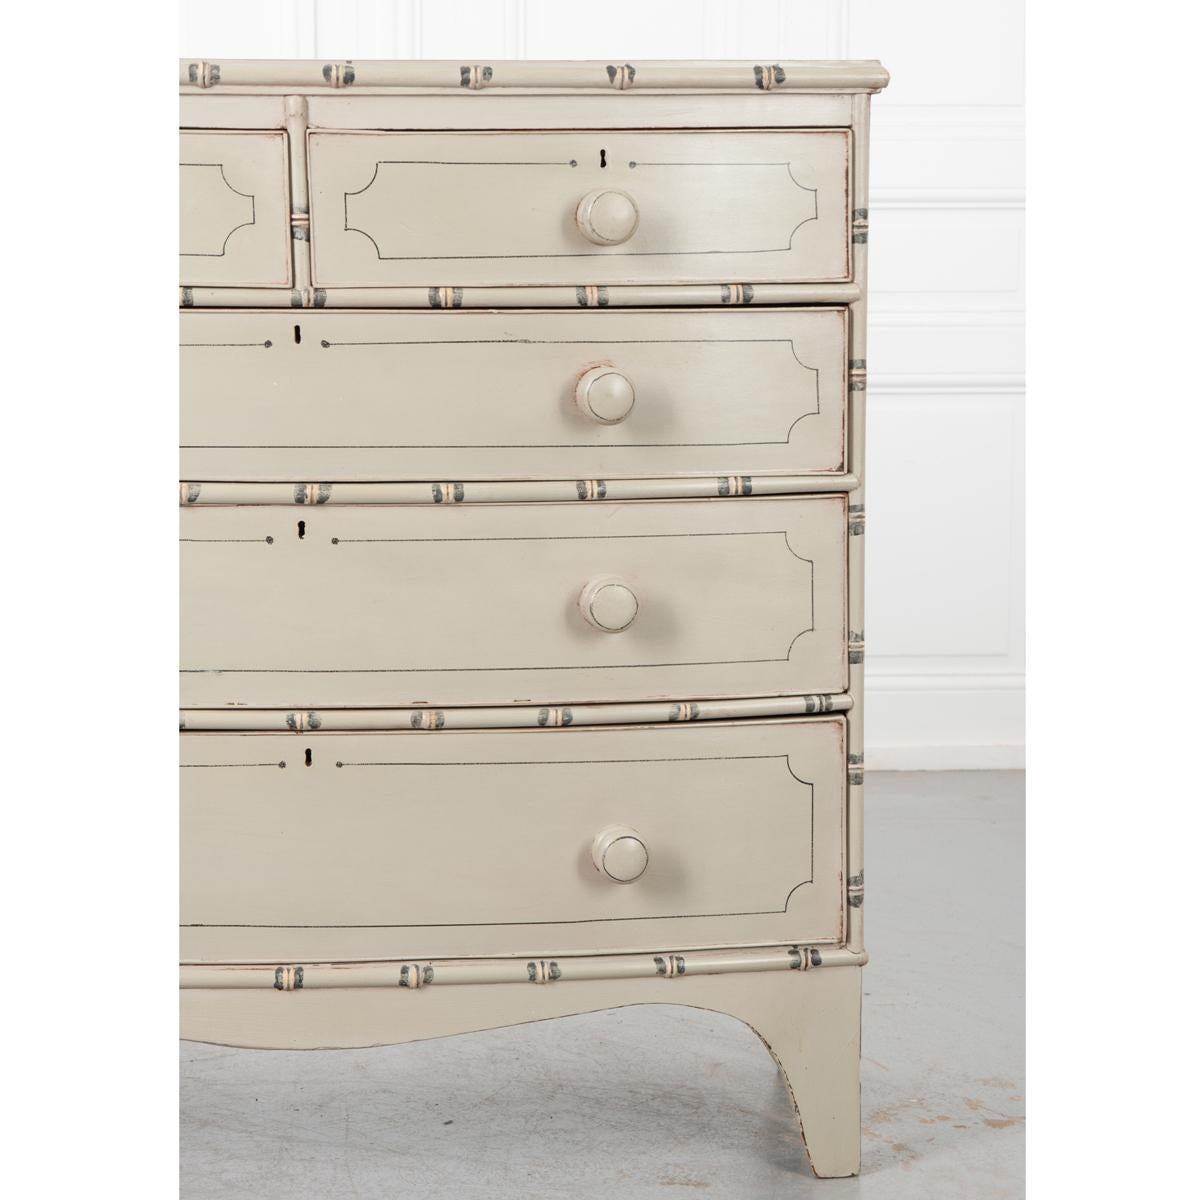 This is an English 19th Century pine chest recently painted in a layered cream finish with faux bamboo designs. It has two smaller drawers across the top and three wide and deep drawers beneath all with wood turned knobs. All the drawers are in